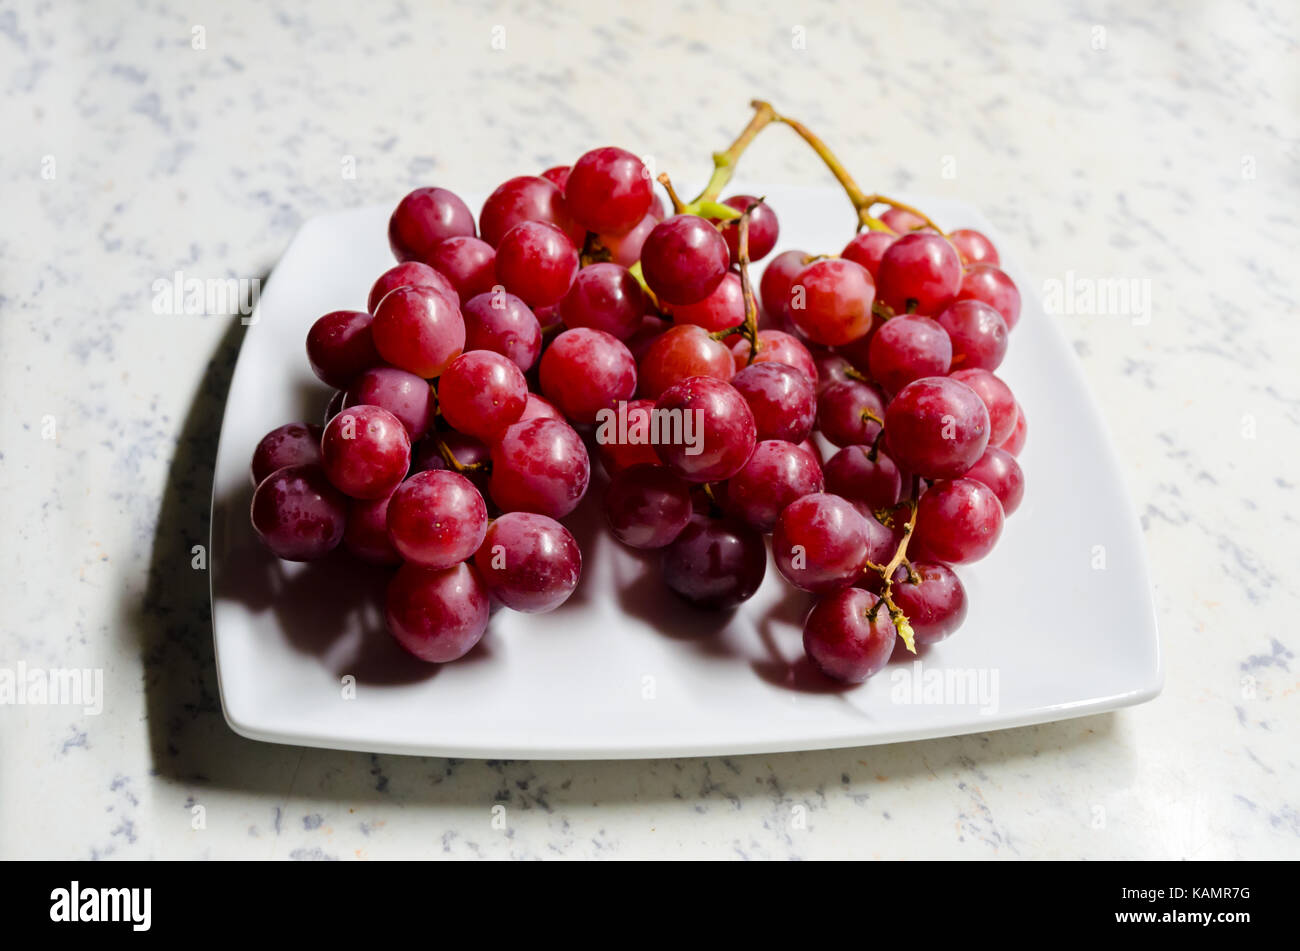 A Studio Photograph of a Bunch of 'Flame' Variety (Vitis Vinifera) Grapes on a Serving Plate Stock Photo